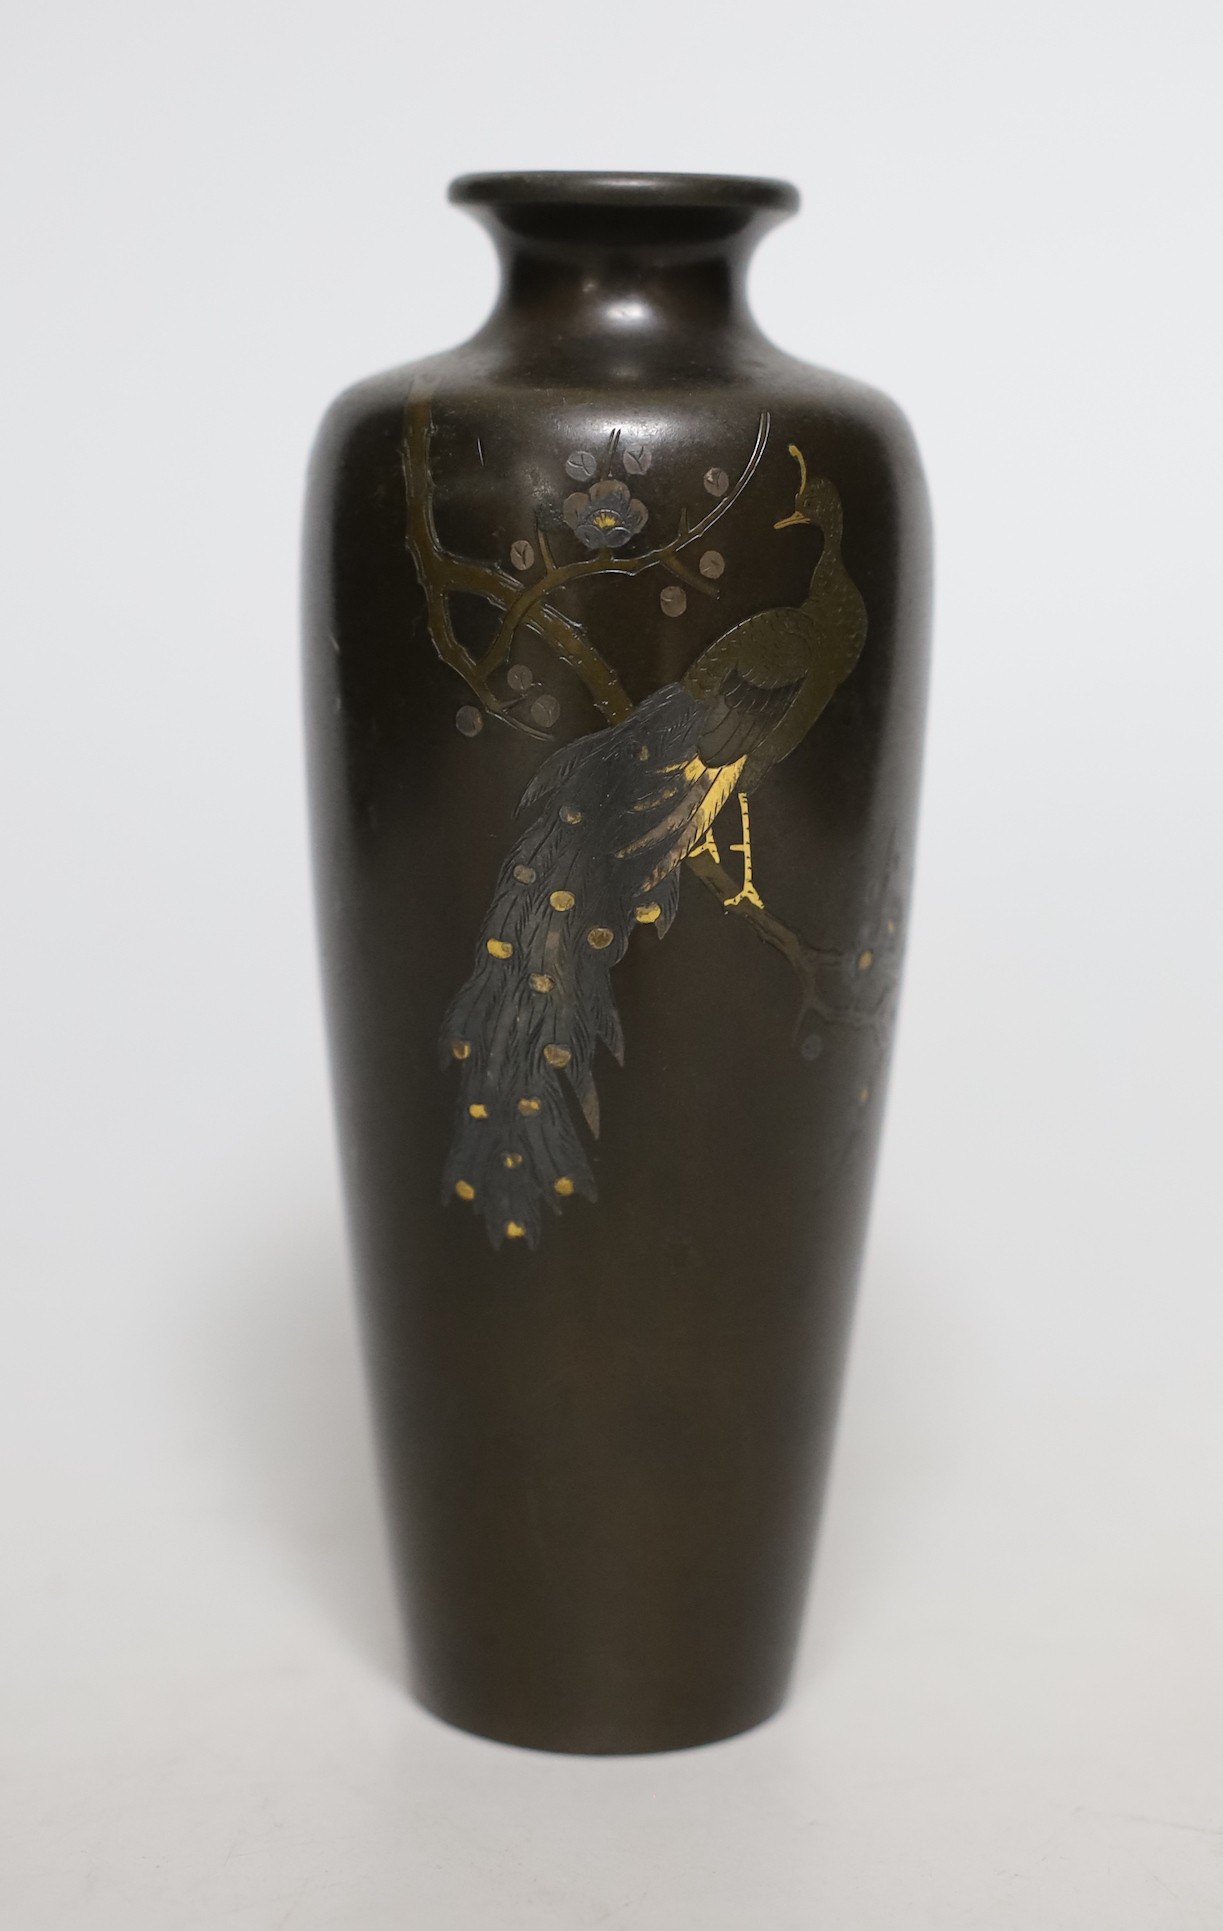 A Japanese bronze vase, inset with a mixed metal pheasant design, 15cm high